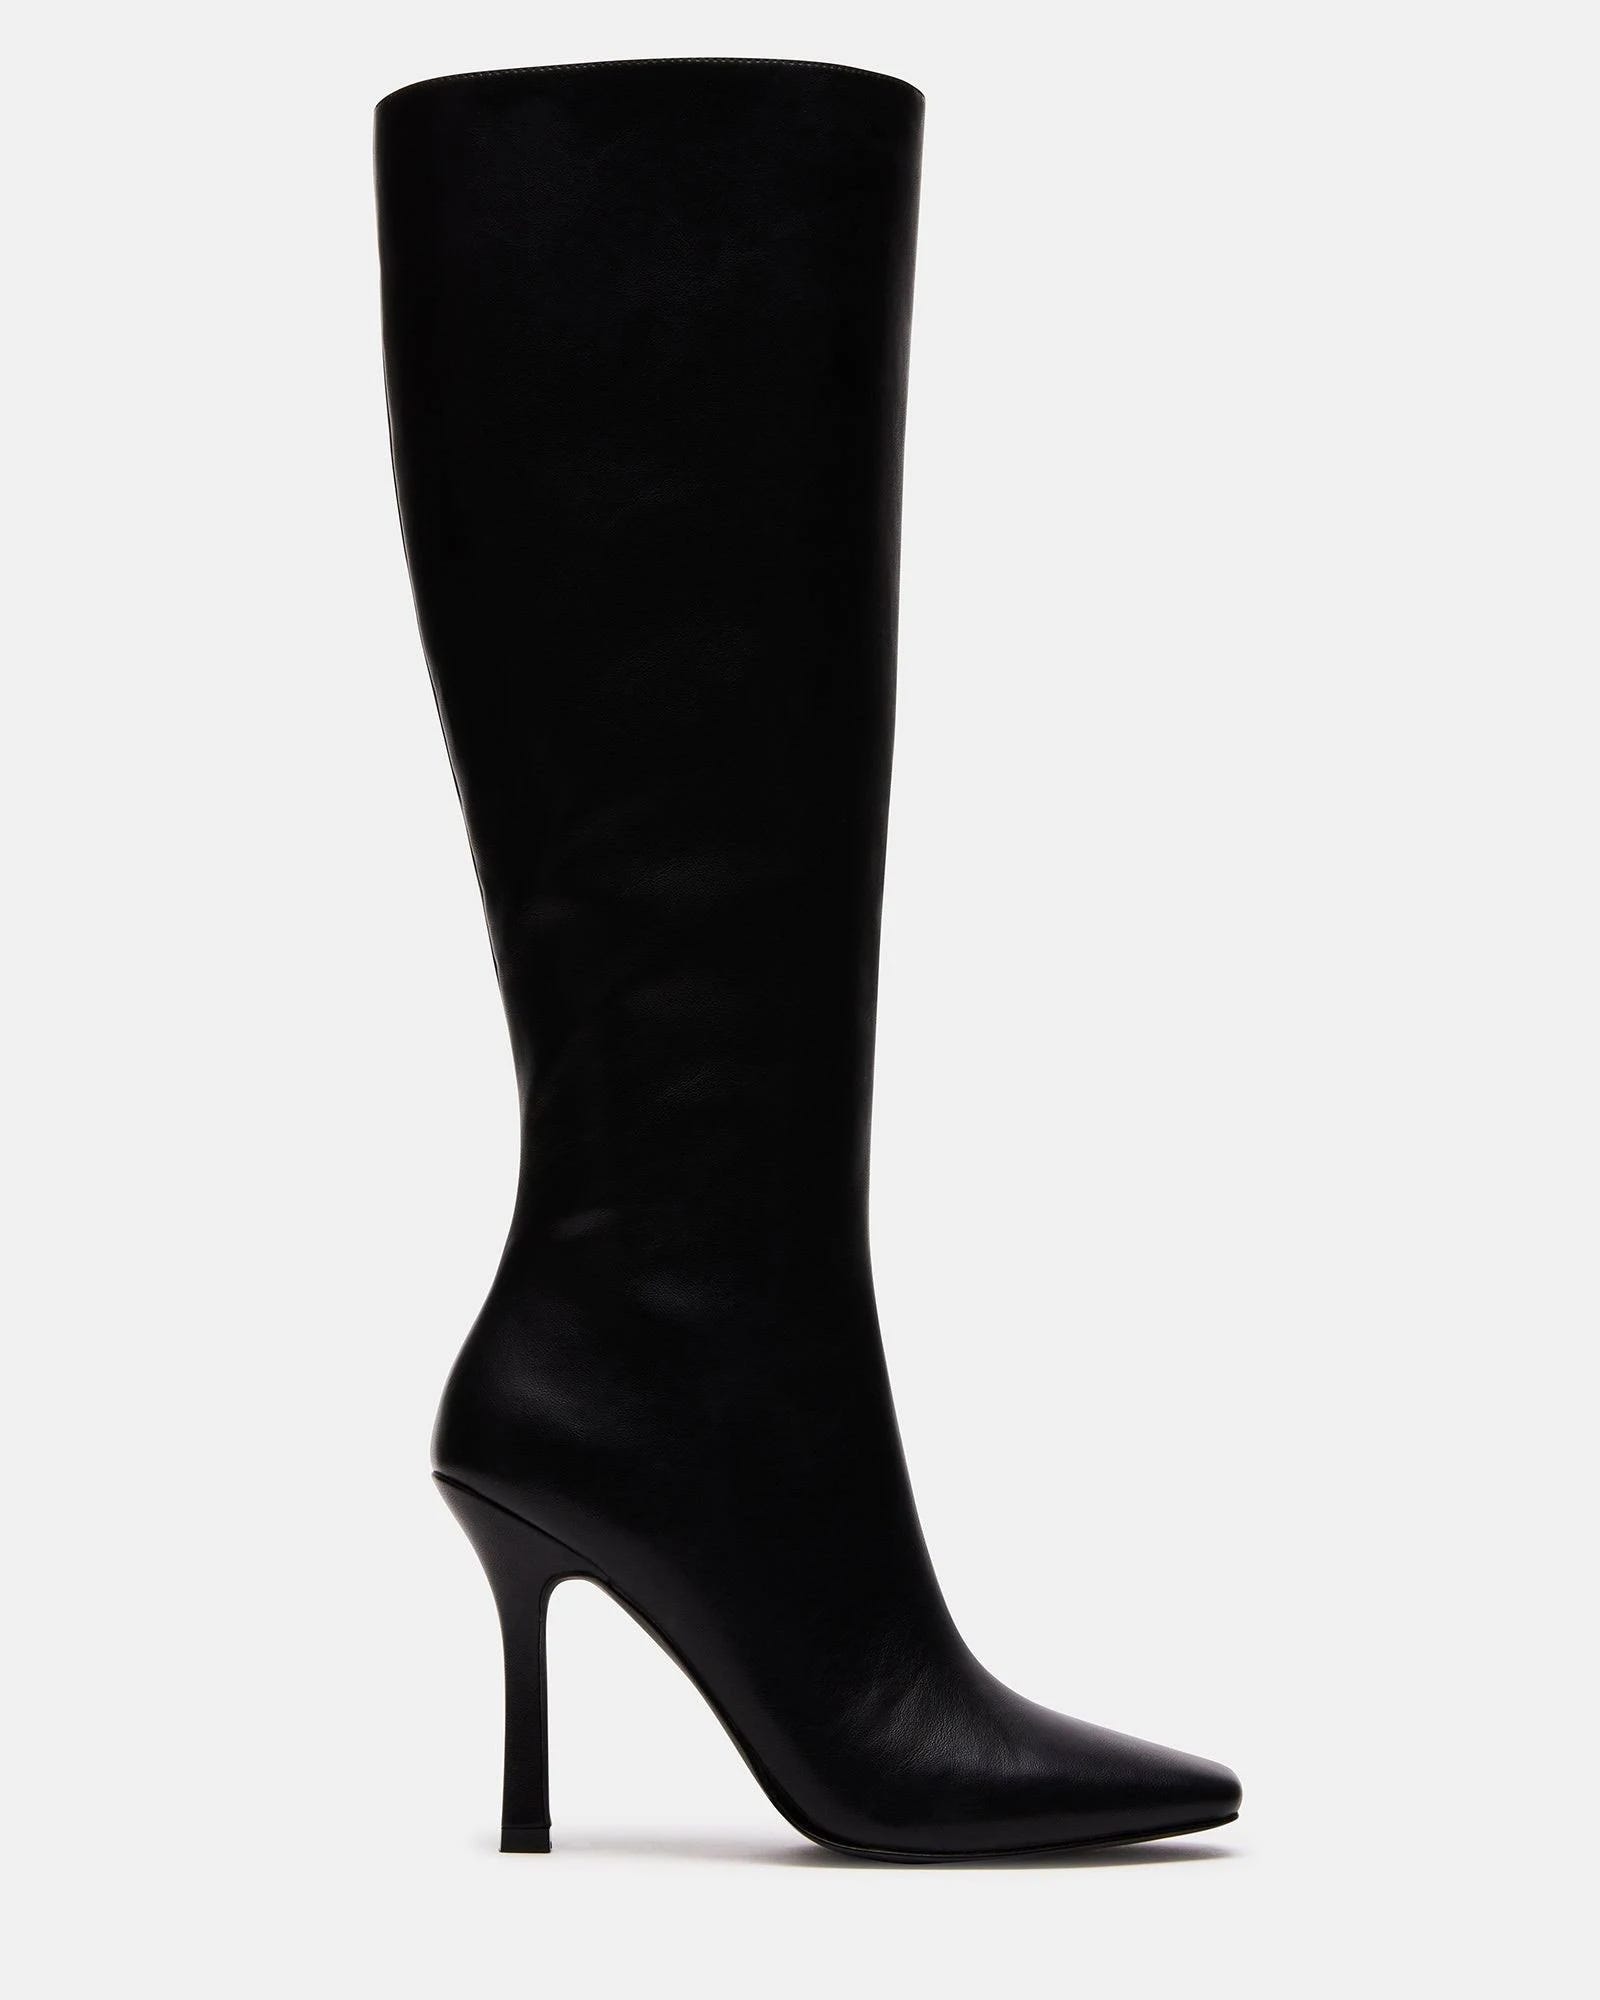 Stylish Black Square Toe Knee High Boots by Steve Madden | Image